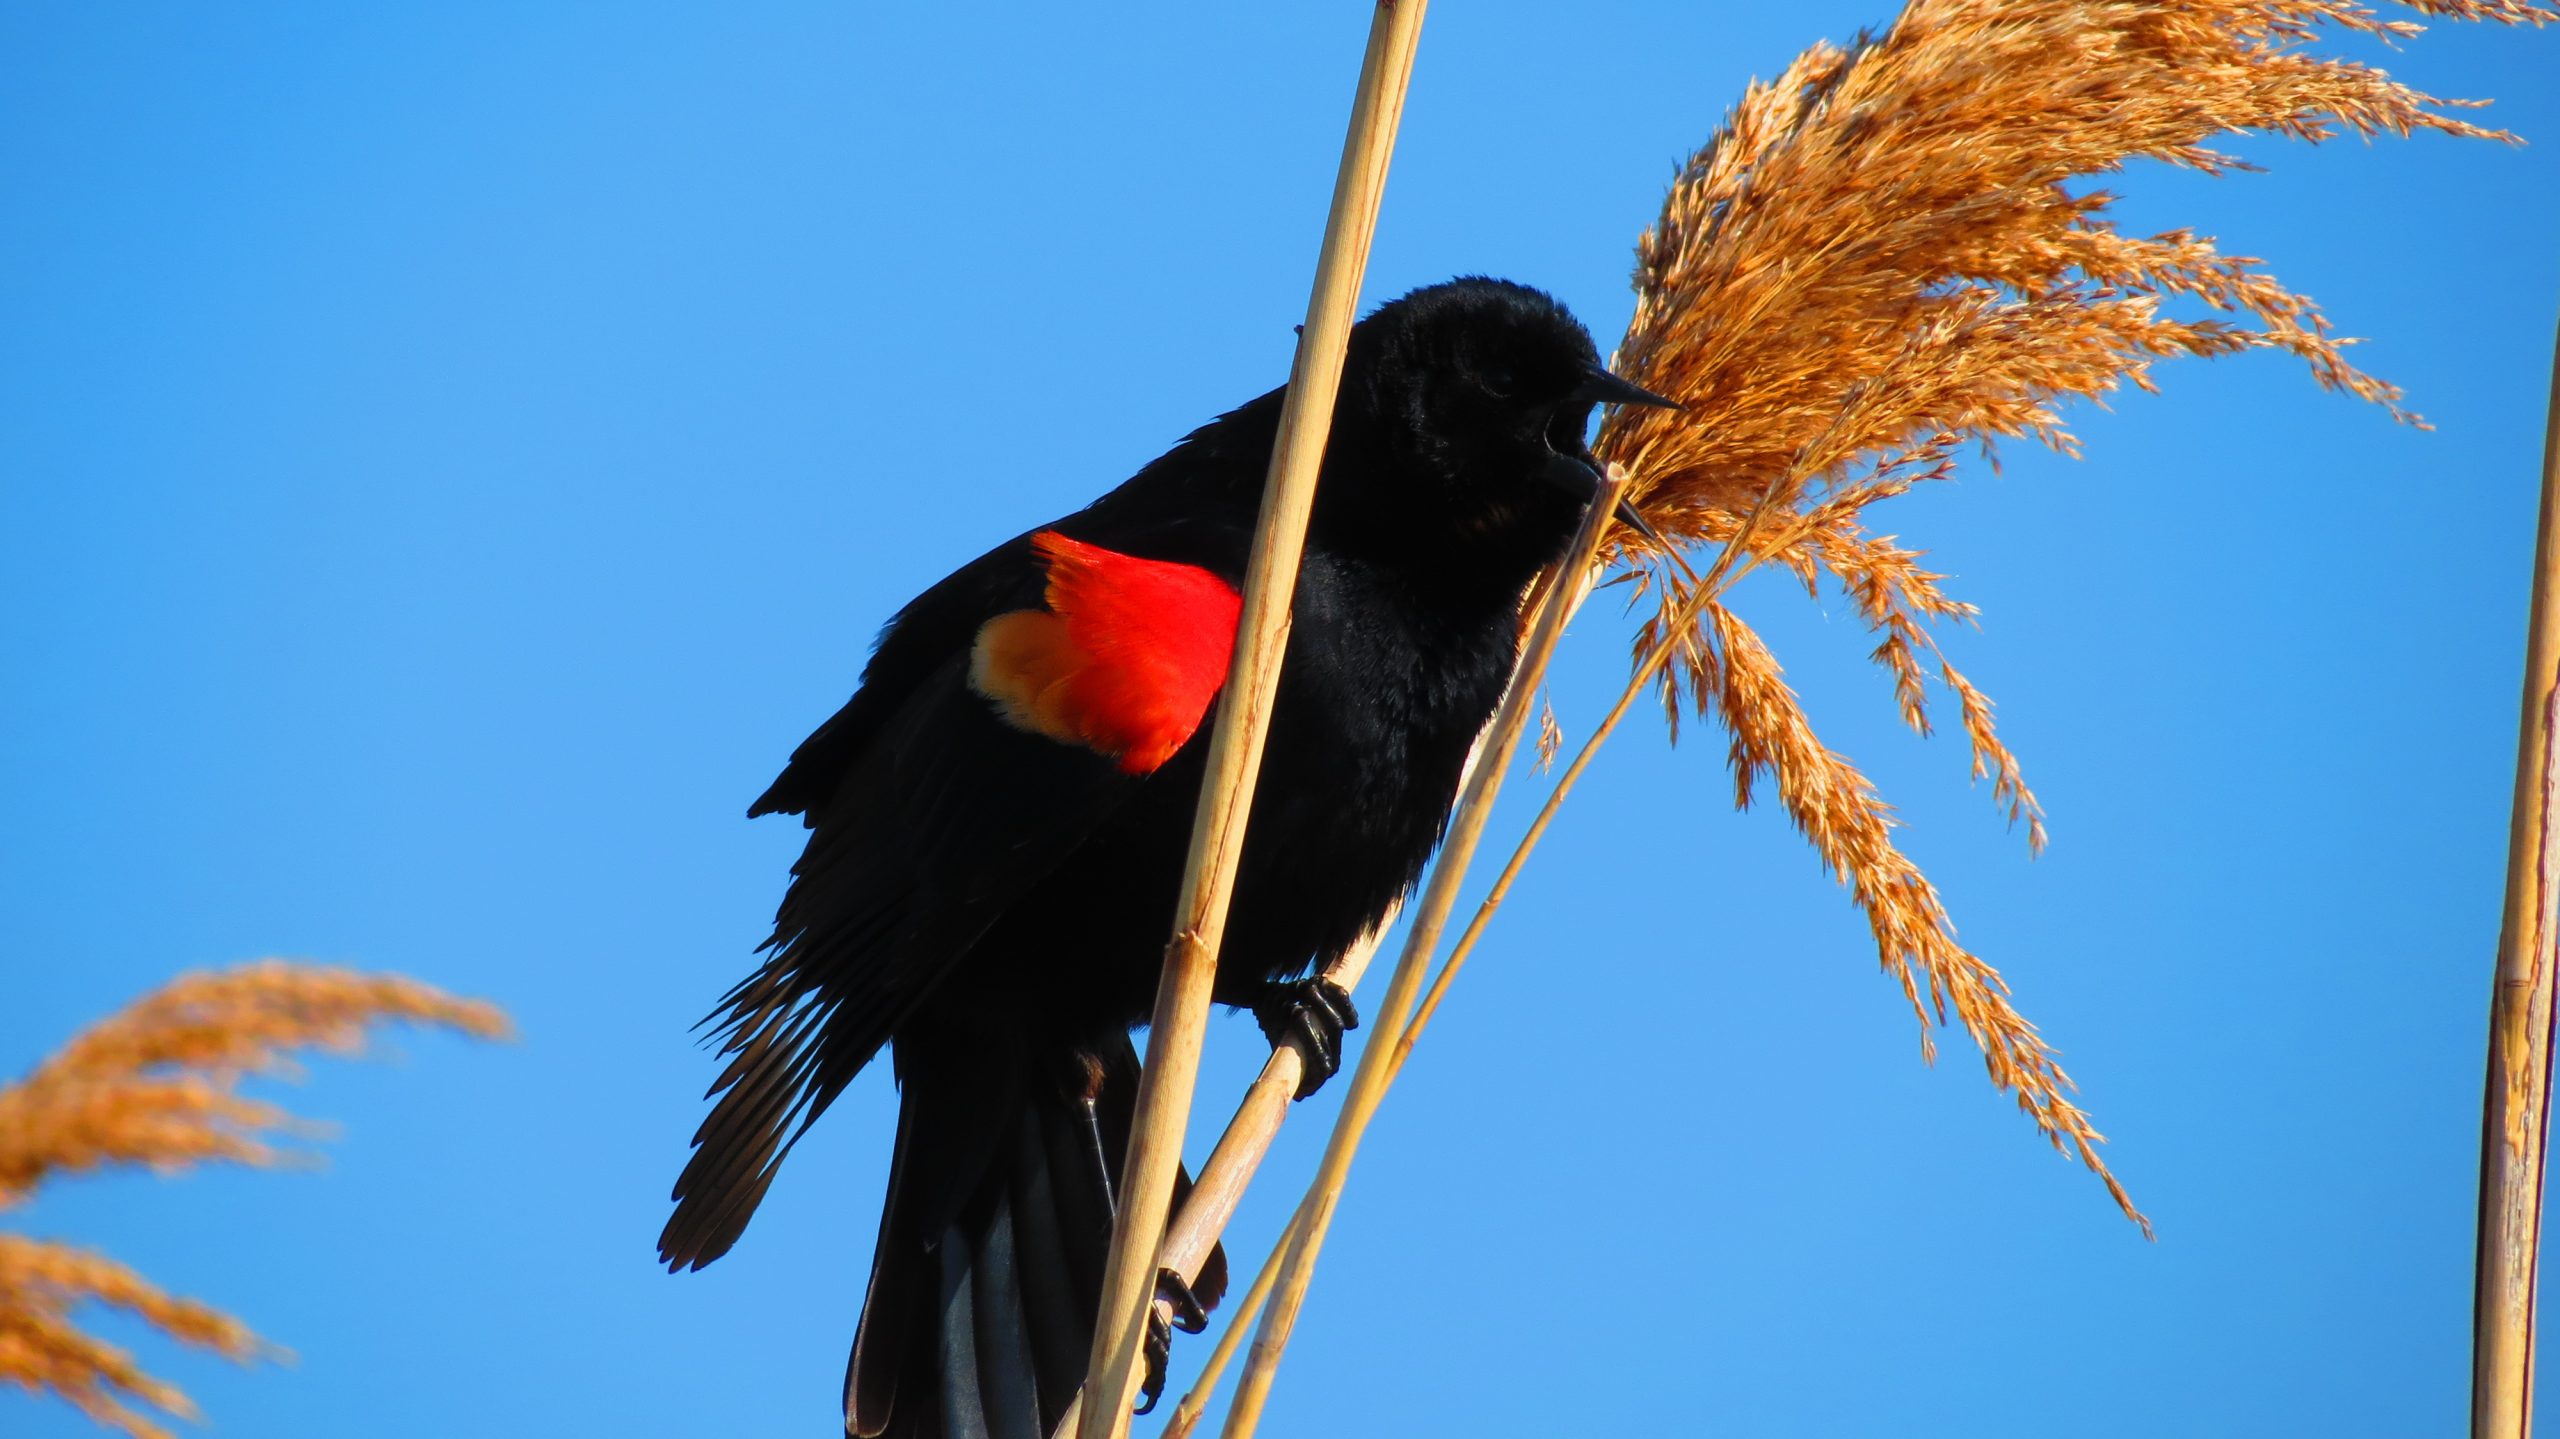 A puffed up red-winged blackbird calling from his perch in common reeds at the Don Valley Brick Works Park.